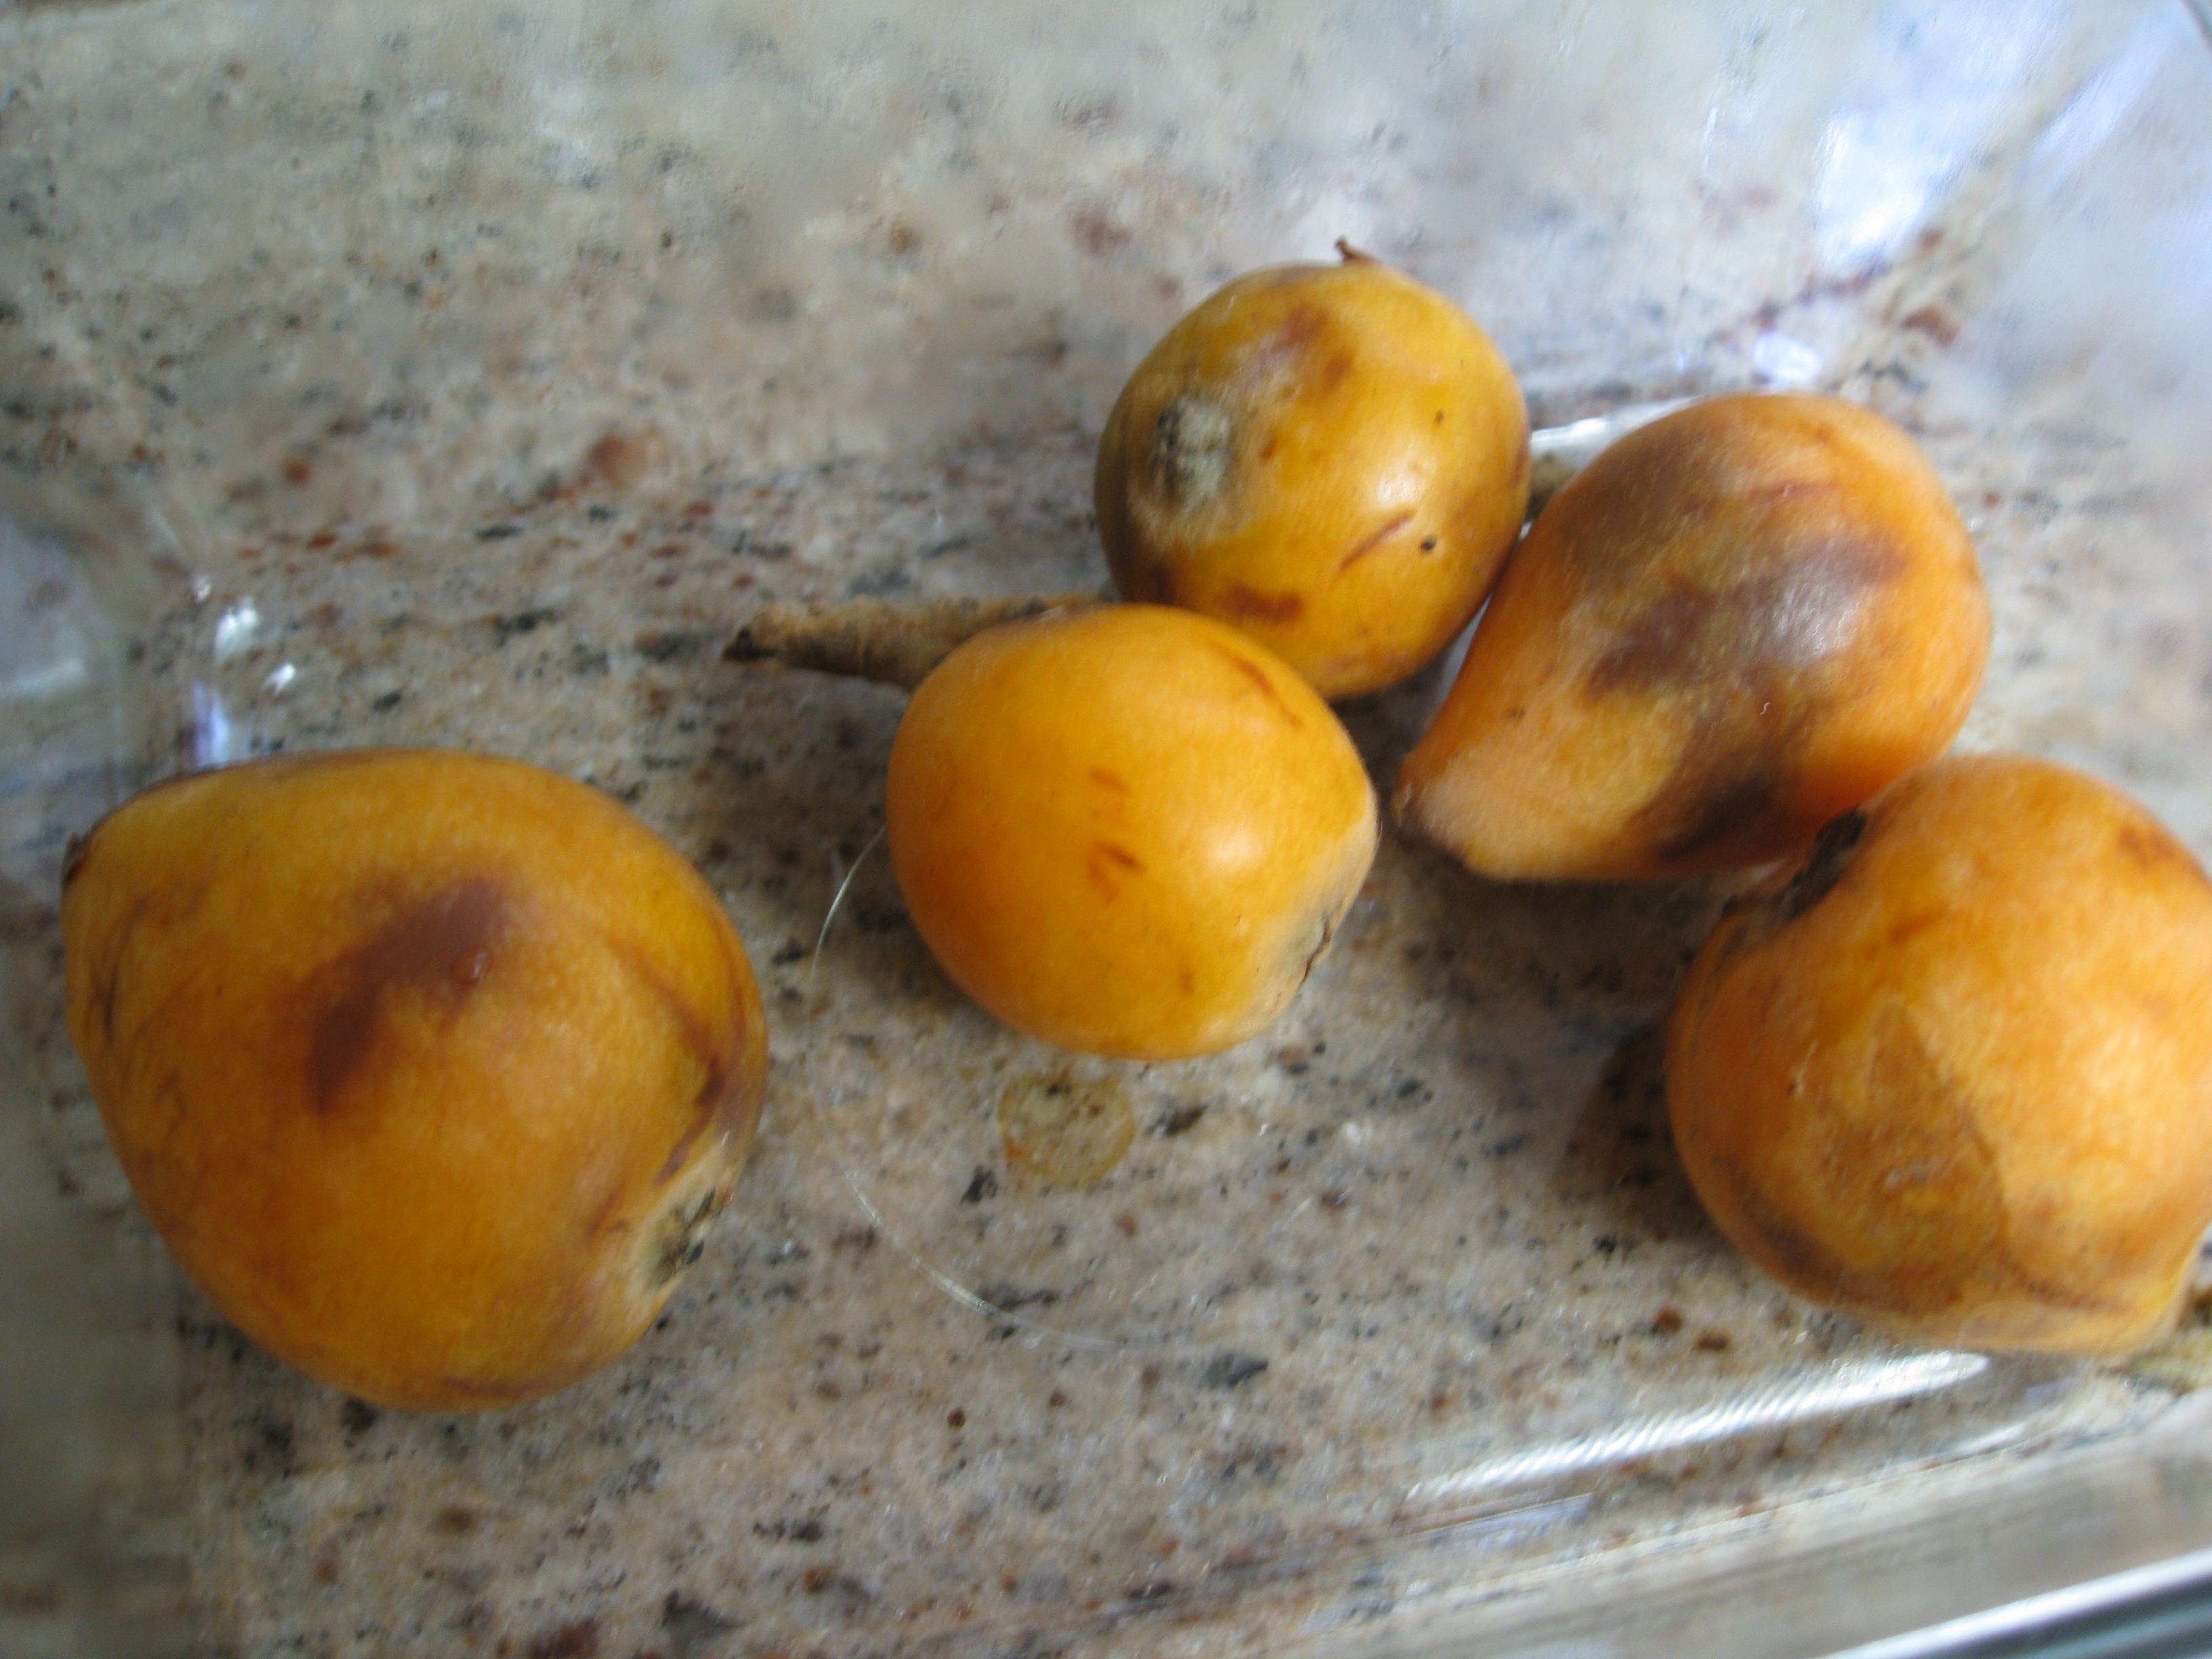 Loquats bruise easily, but they still taste delicious.